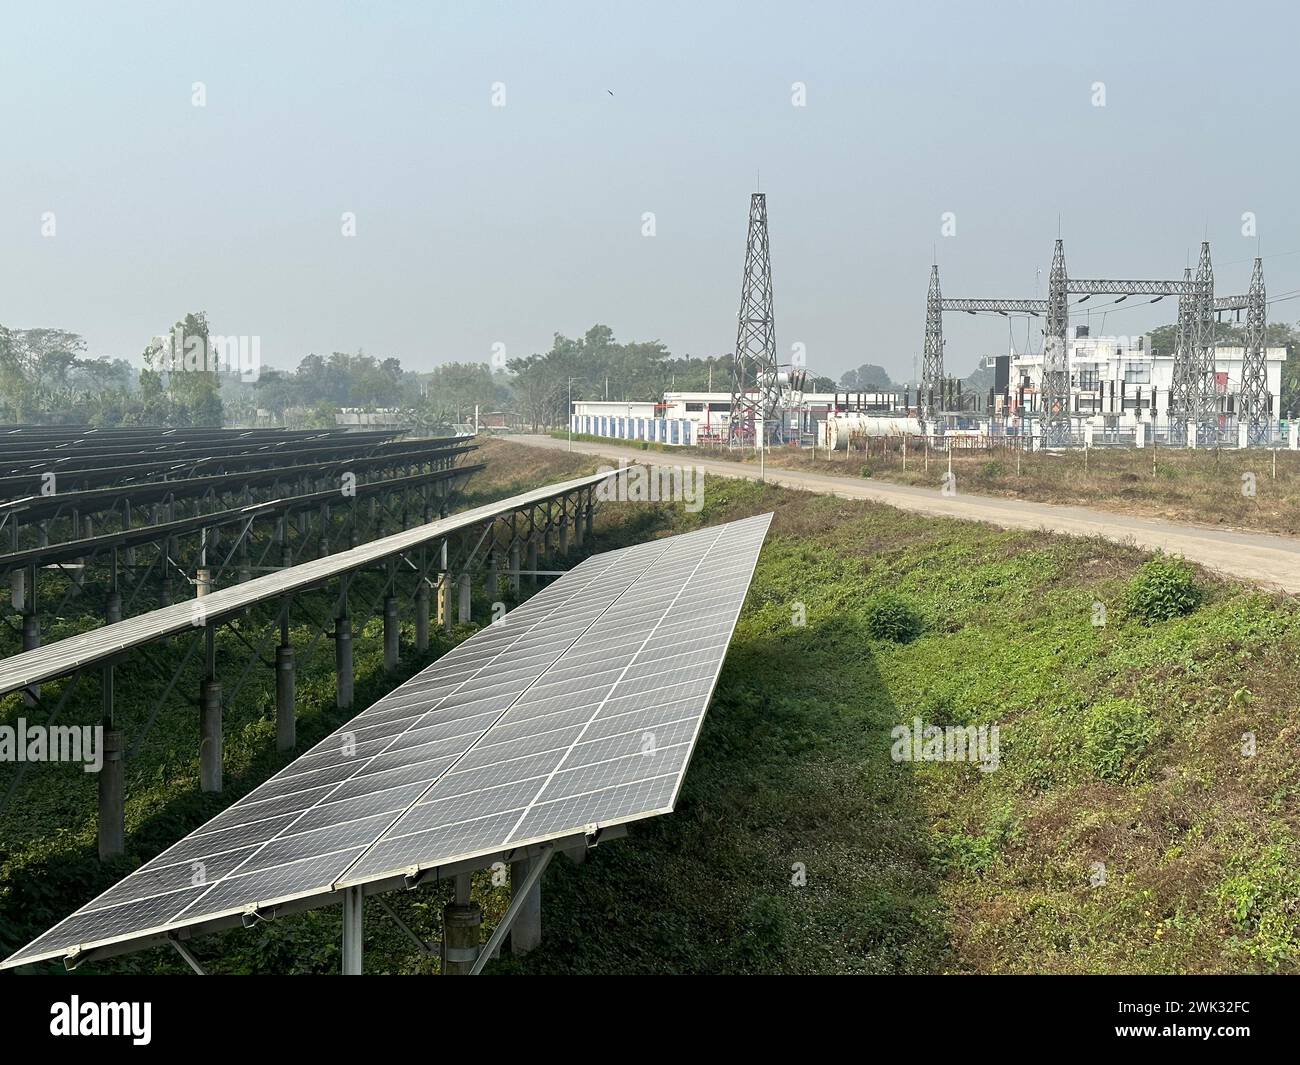 (240218) -- DHAKA, Feb. 18, 2024 (Xinhua) -- This photo taken on Feb. 17, 2024 shows a 50 MW Chinese-built photovoltaic power plant in Mymensingh District, Bangladesh. The Mymensingh district in north-central Bangladesh enjoys better sunshine than any other place in the South Asian country.The 50 MW photovoltaic power plant invested by HDFC SinPower Ltd. whose major shareholder is China Huadian Overseas Investment Co., Ltd. started construction in September 2019 to utilize the advantage of solar resources here. Overcoming difficulties during the construction, the project was put into commercia Stock Photo